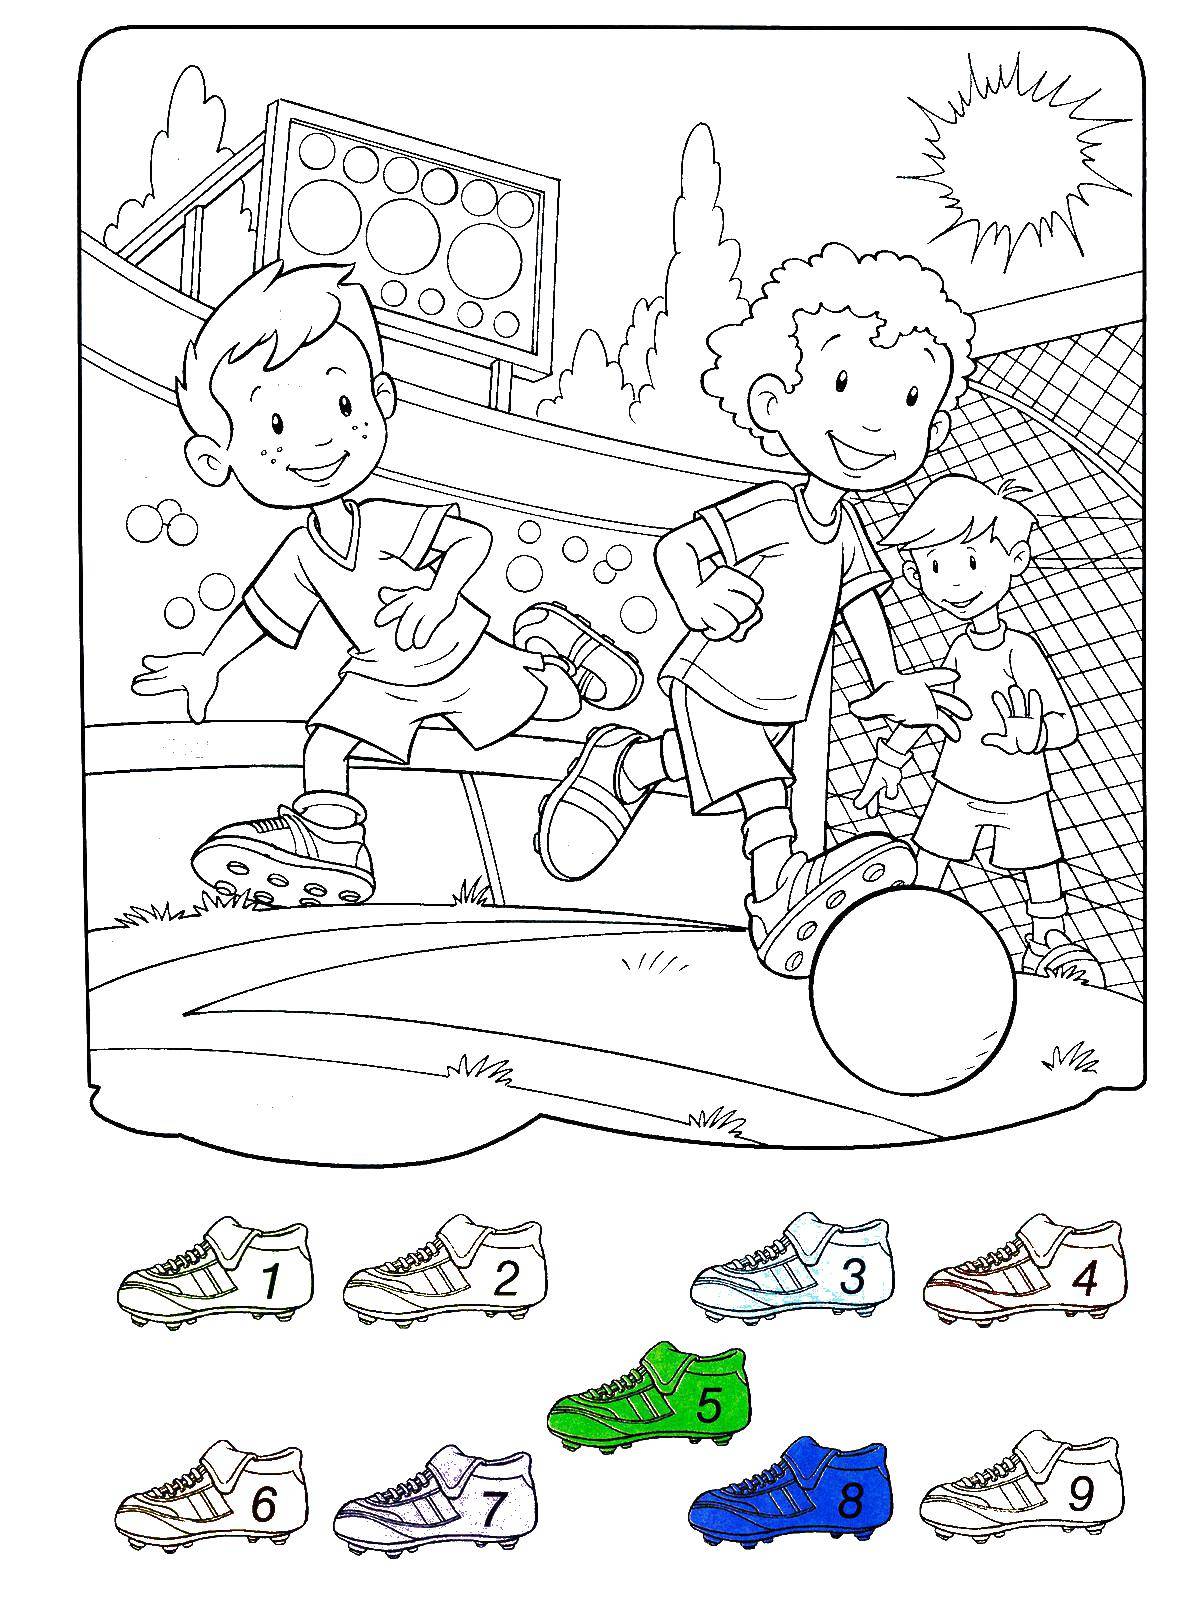 Coloring Boy playing soccer. Category sports. Tags:  sports, soccer, players, game.